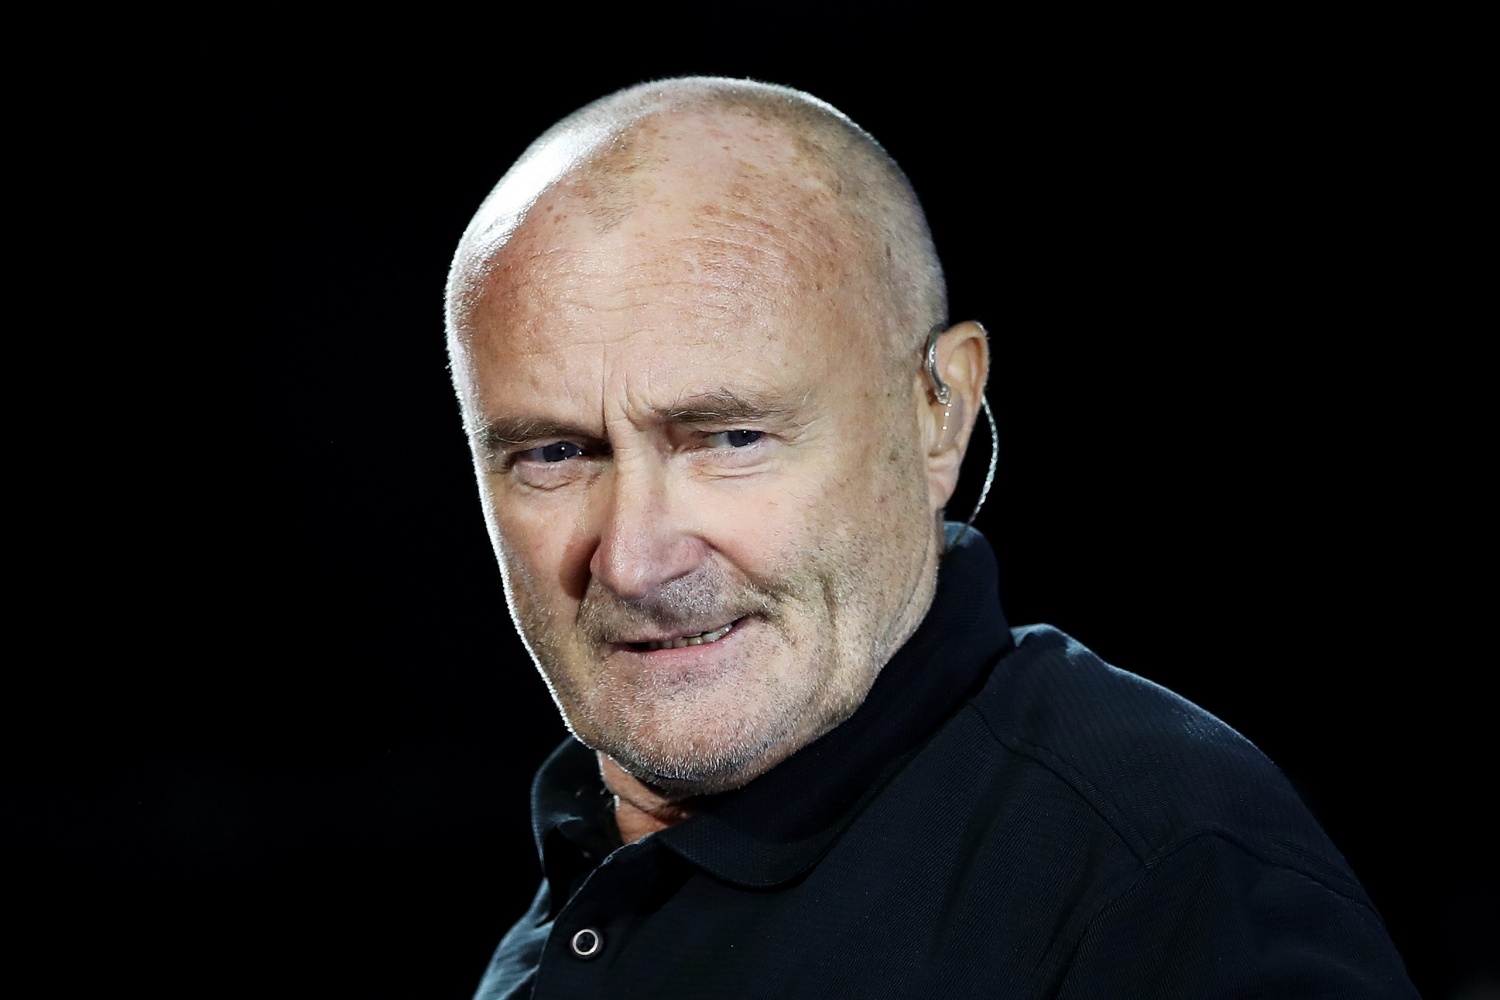 Phil Collins' 'In The Air Tonight' Reworked as NFL's 'Monday Night Football' Theme Song